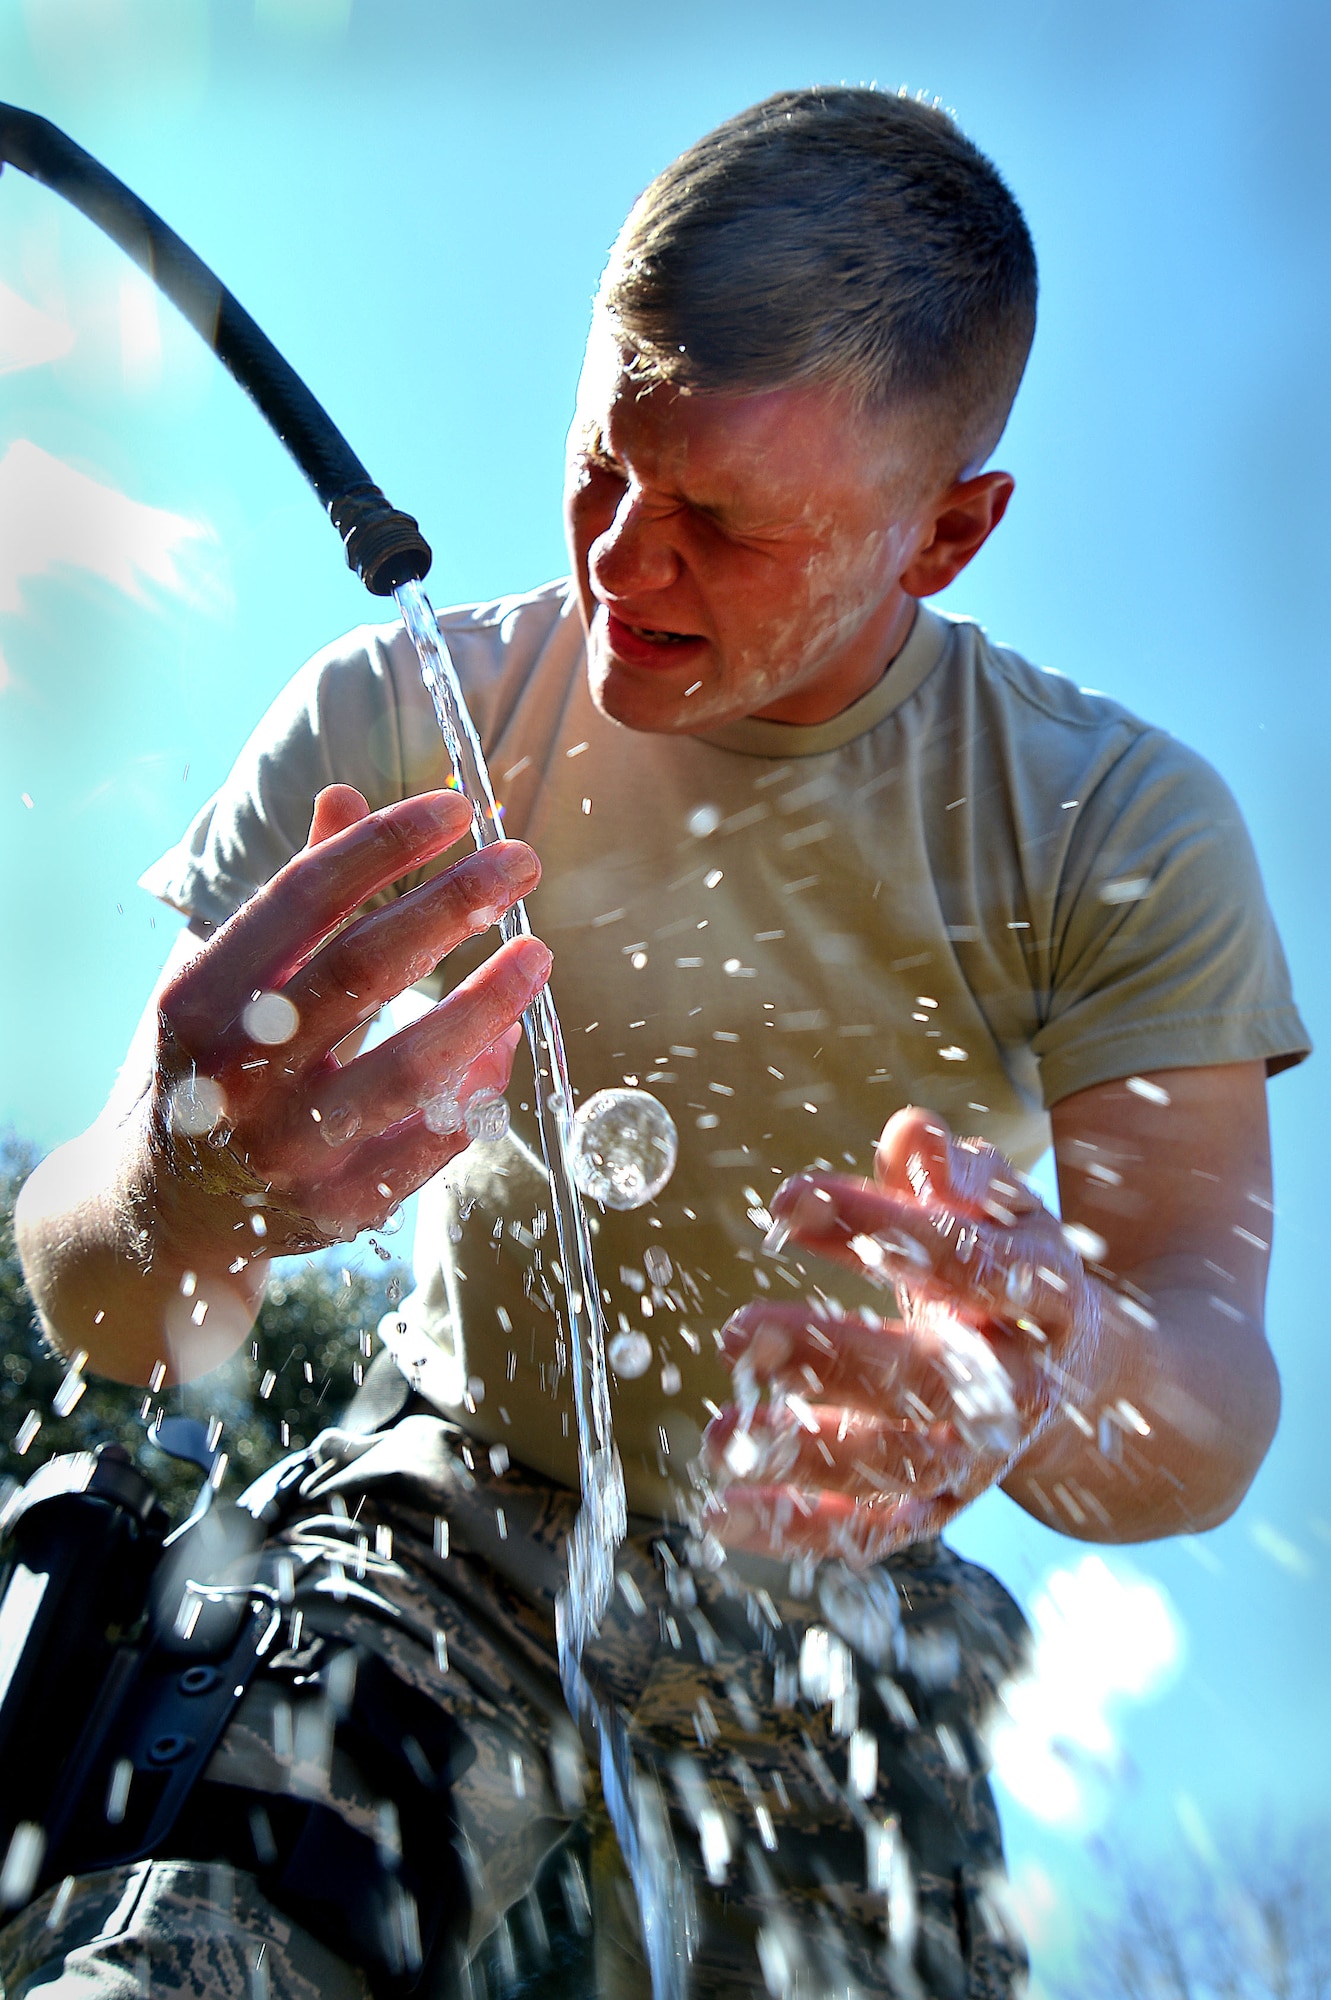 U.S Air Force Airman 1st Class Colin Patterson, 20th Security Forces Squadron entry controller, washes his face after pepper spray training at Shaw Air Force Base, S.C., Feb. 29, 2016. Pepper spray, also known as oleoresin capsicum, is made from the same naturally-occurring chemical that makes chili peppers hot, but at concentrations much higher and is used as a deterrent against perpetrators. (U.S. Air Force photo by Senior Airman Michael Cossaboom)